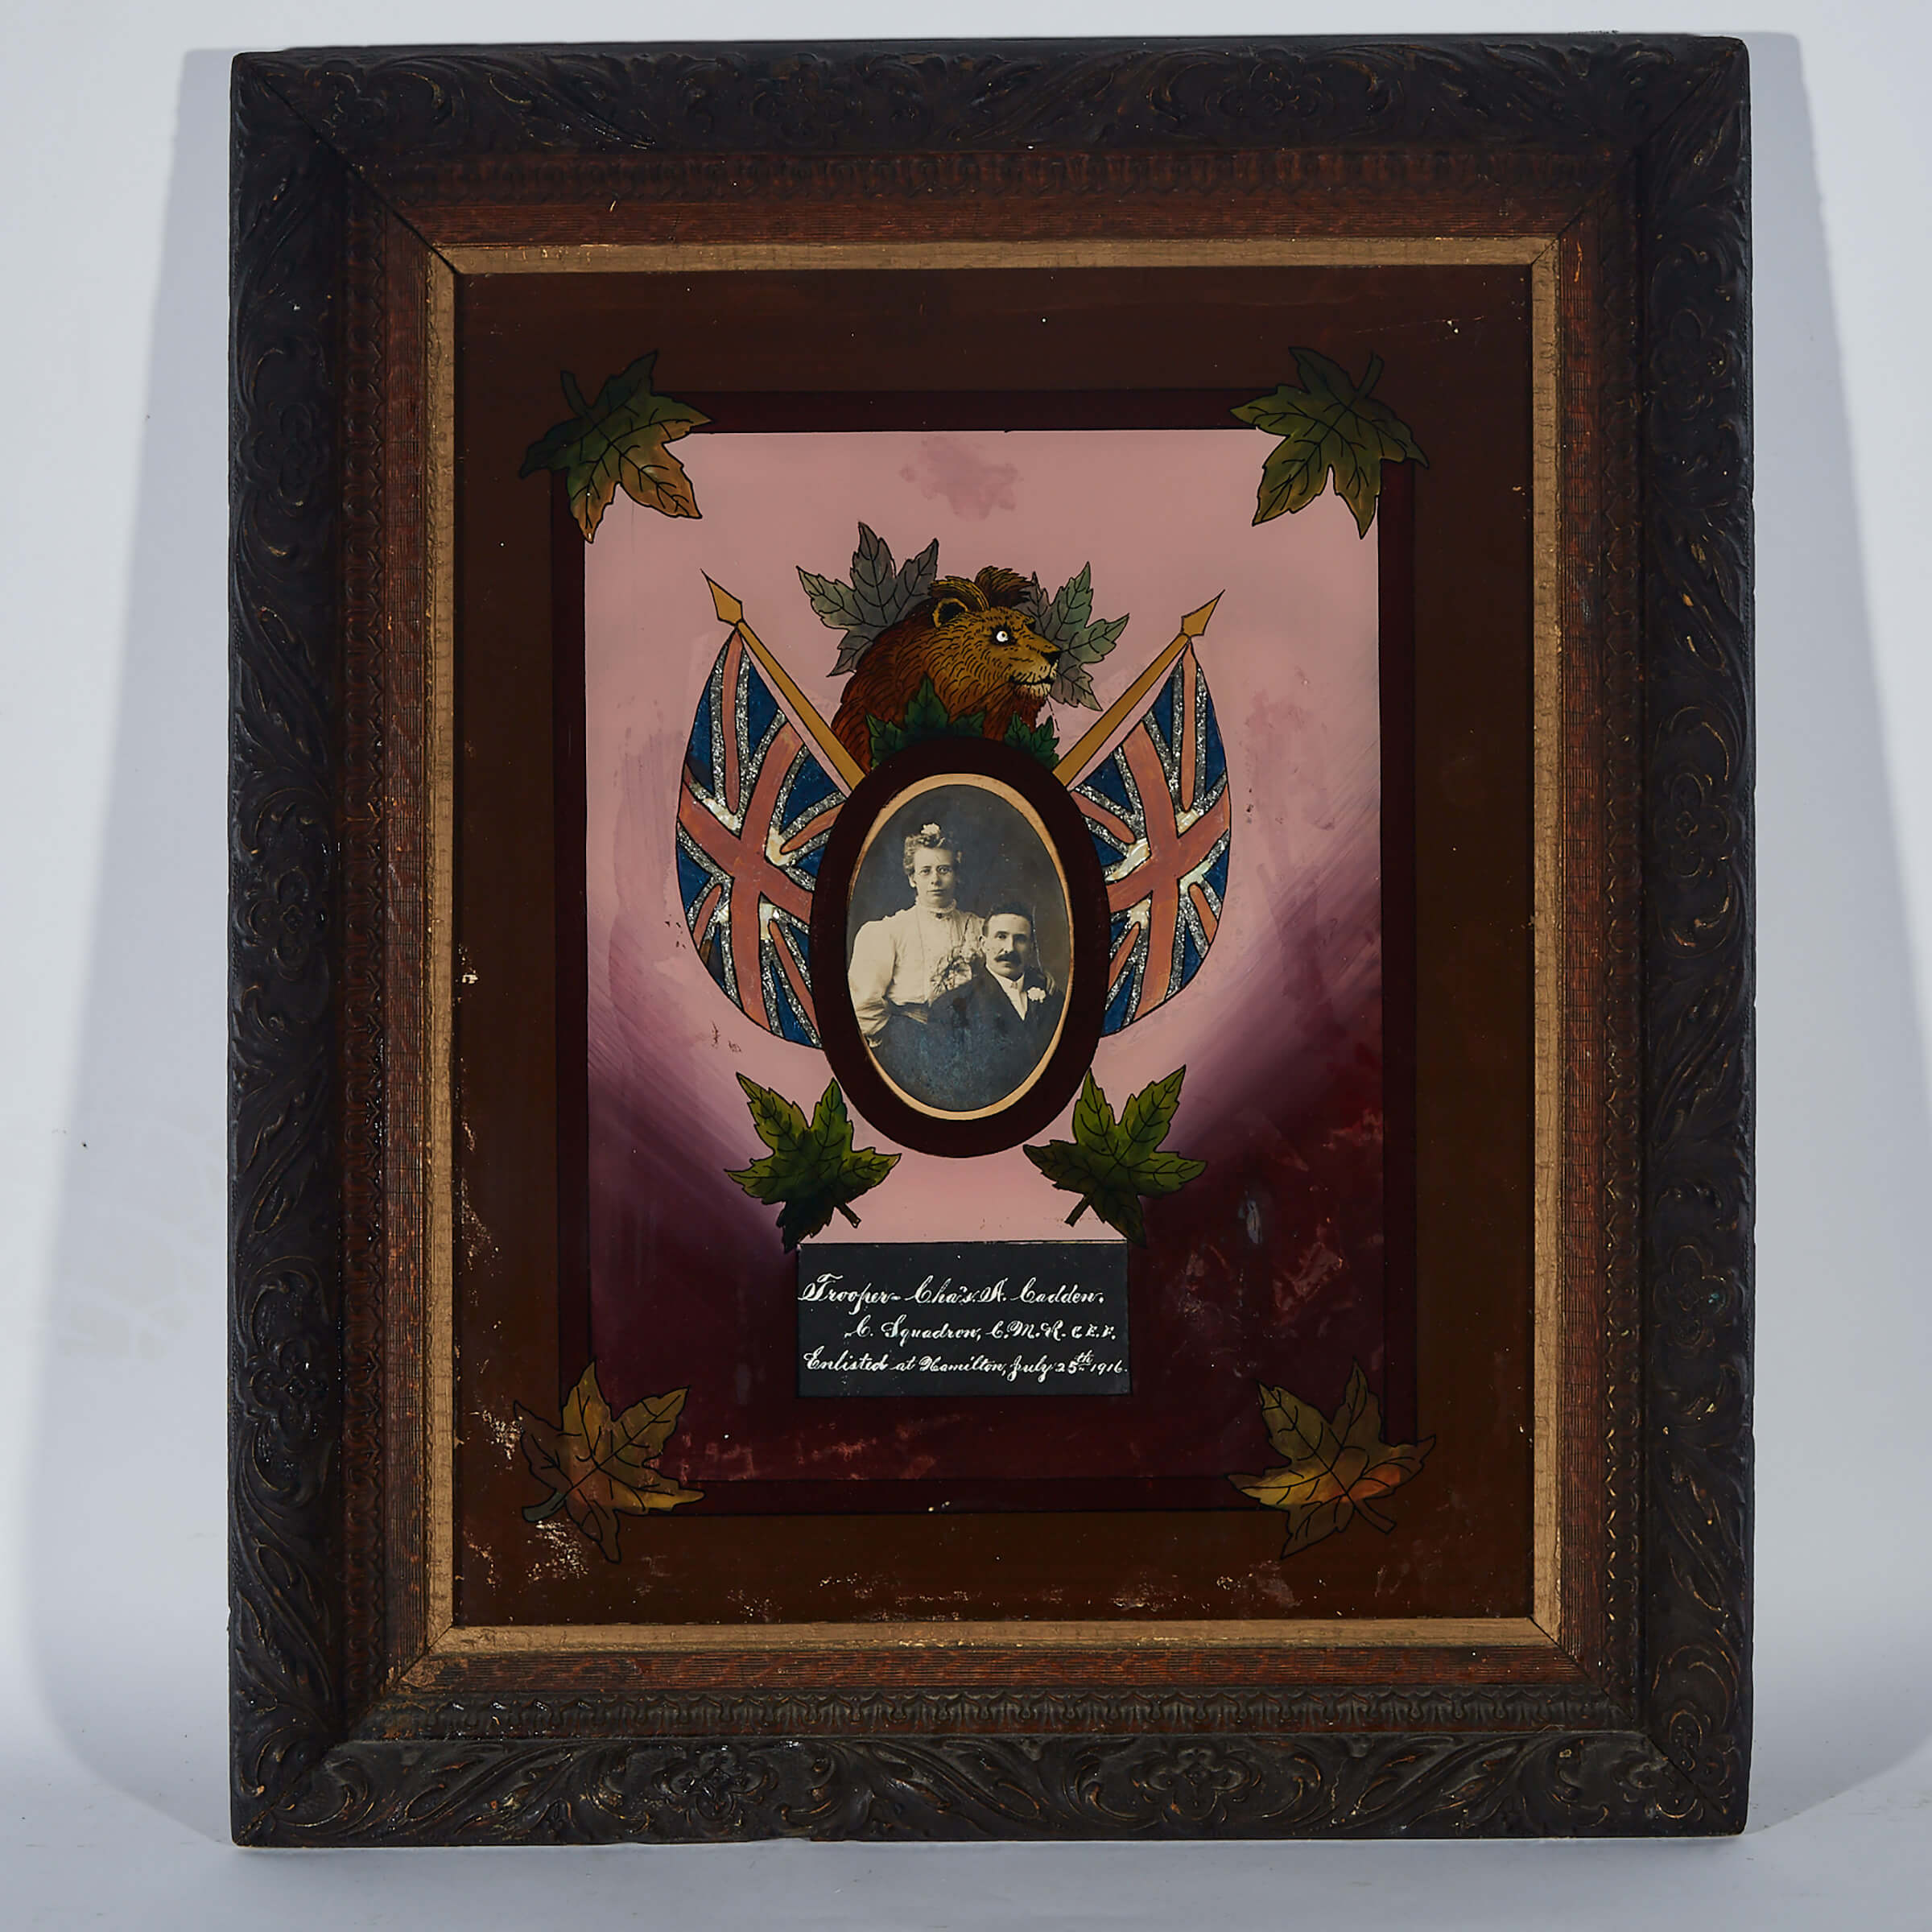 Trooper Chas. A. Cadden, Canadian Expeditionary Forces, Portrait with Reverse Painting on Glass Matt, 1916 